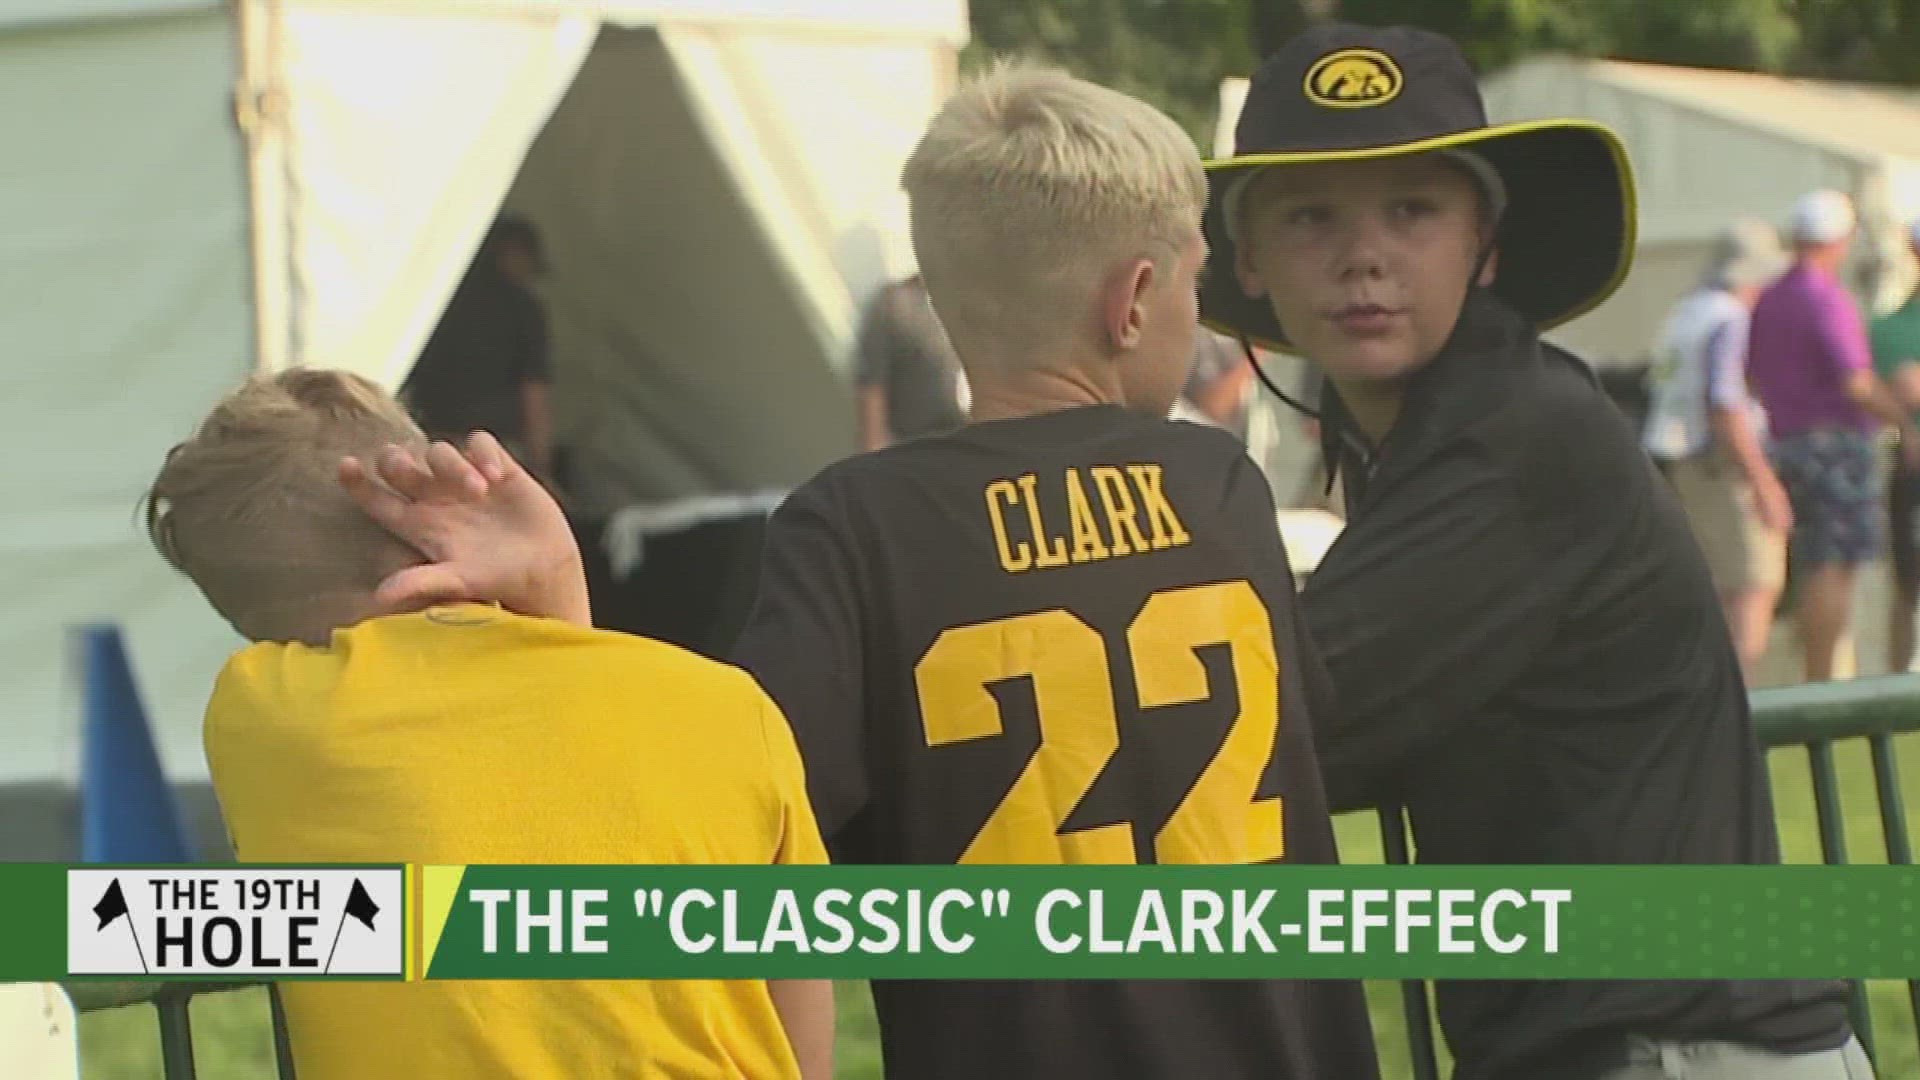 Hawkeye Nation turned out to the JDC in full force for the Iowa superstar. For many young girls in attendance, it was a chance to see Clark up close and personal.